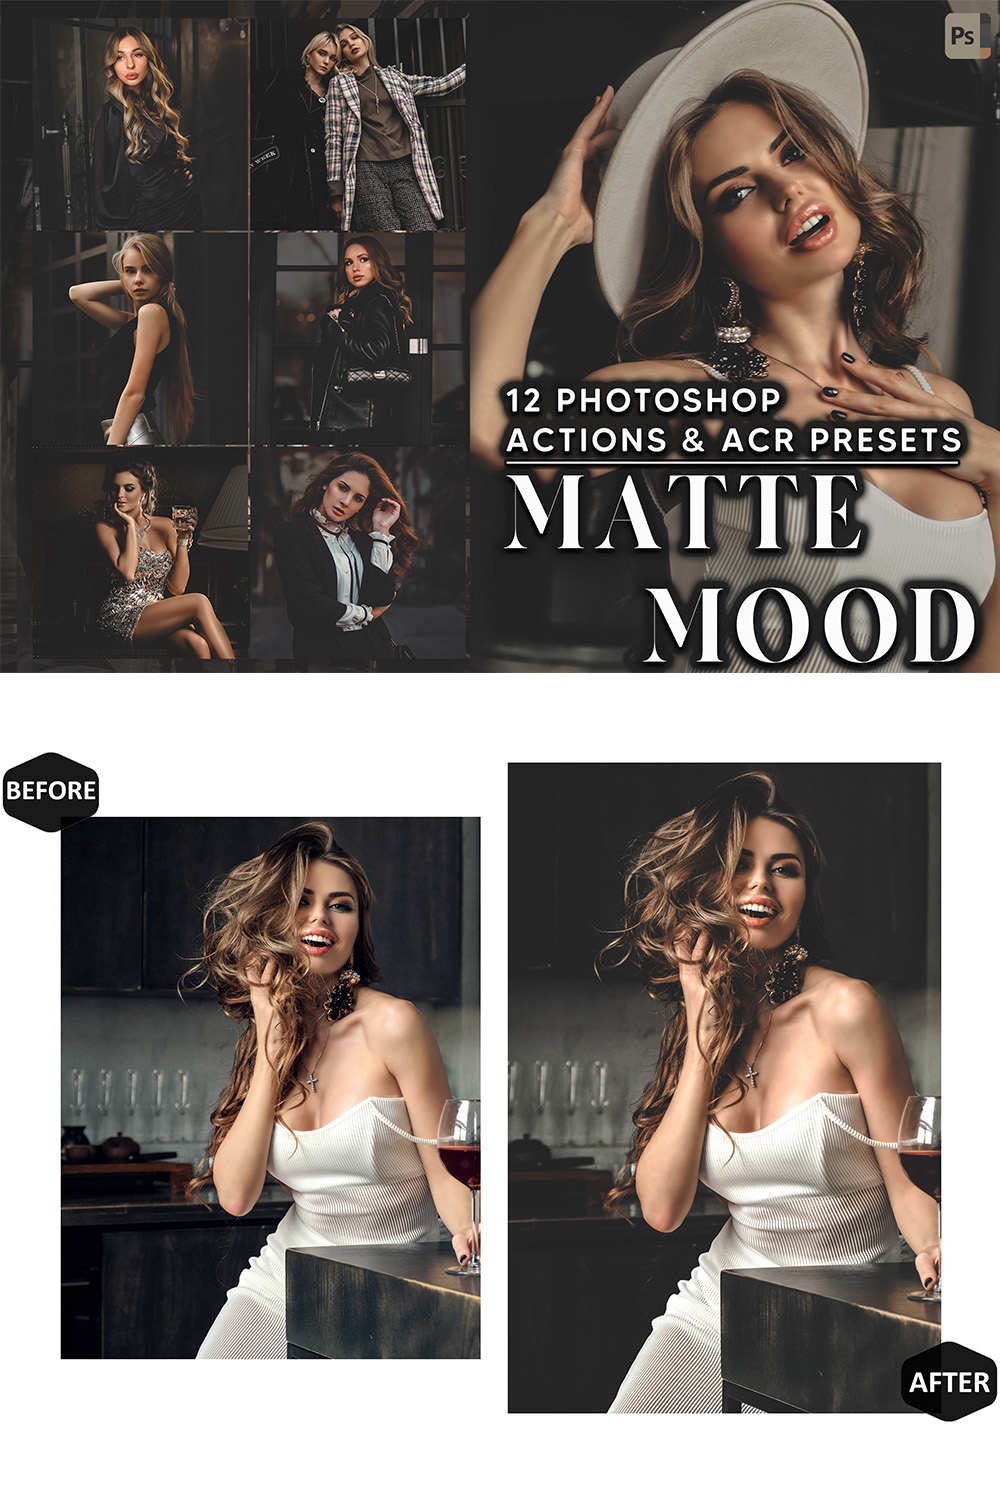 12 Photoshop Actions, Matte Mood Ps Action, Moody ACR Preset, Spring Dark Ps Filter, Atn Portrait And Lifestyle Theme For Instagram, Blogger pinterest preview image.